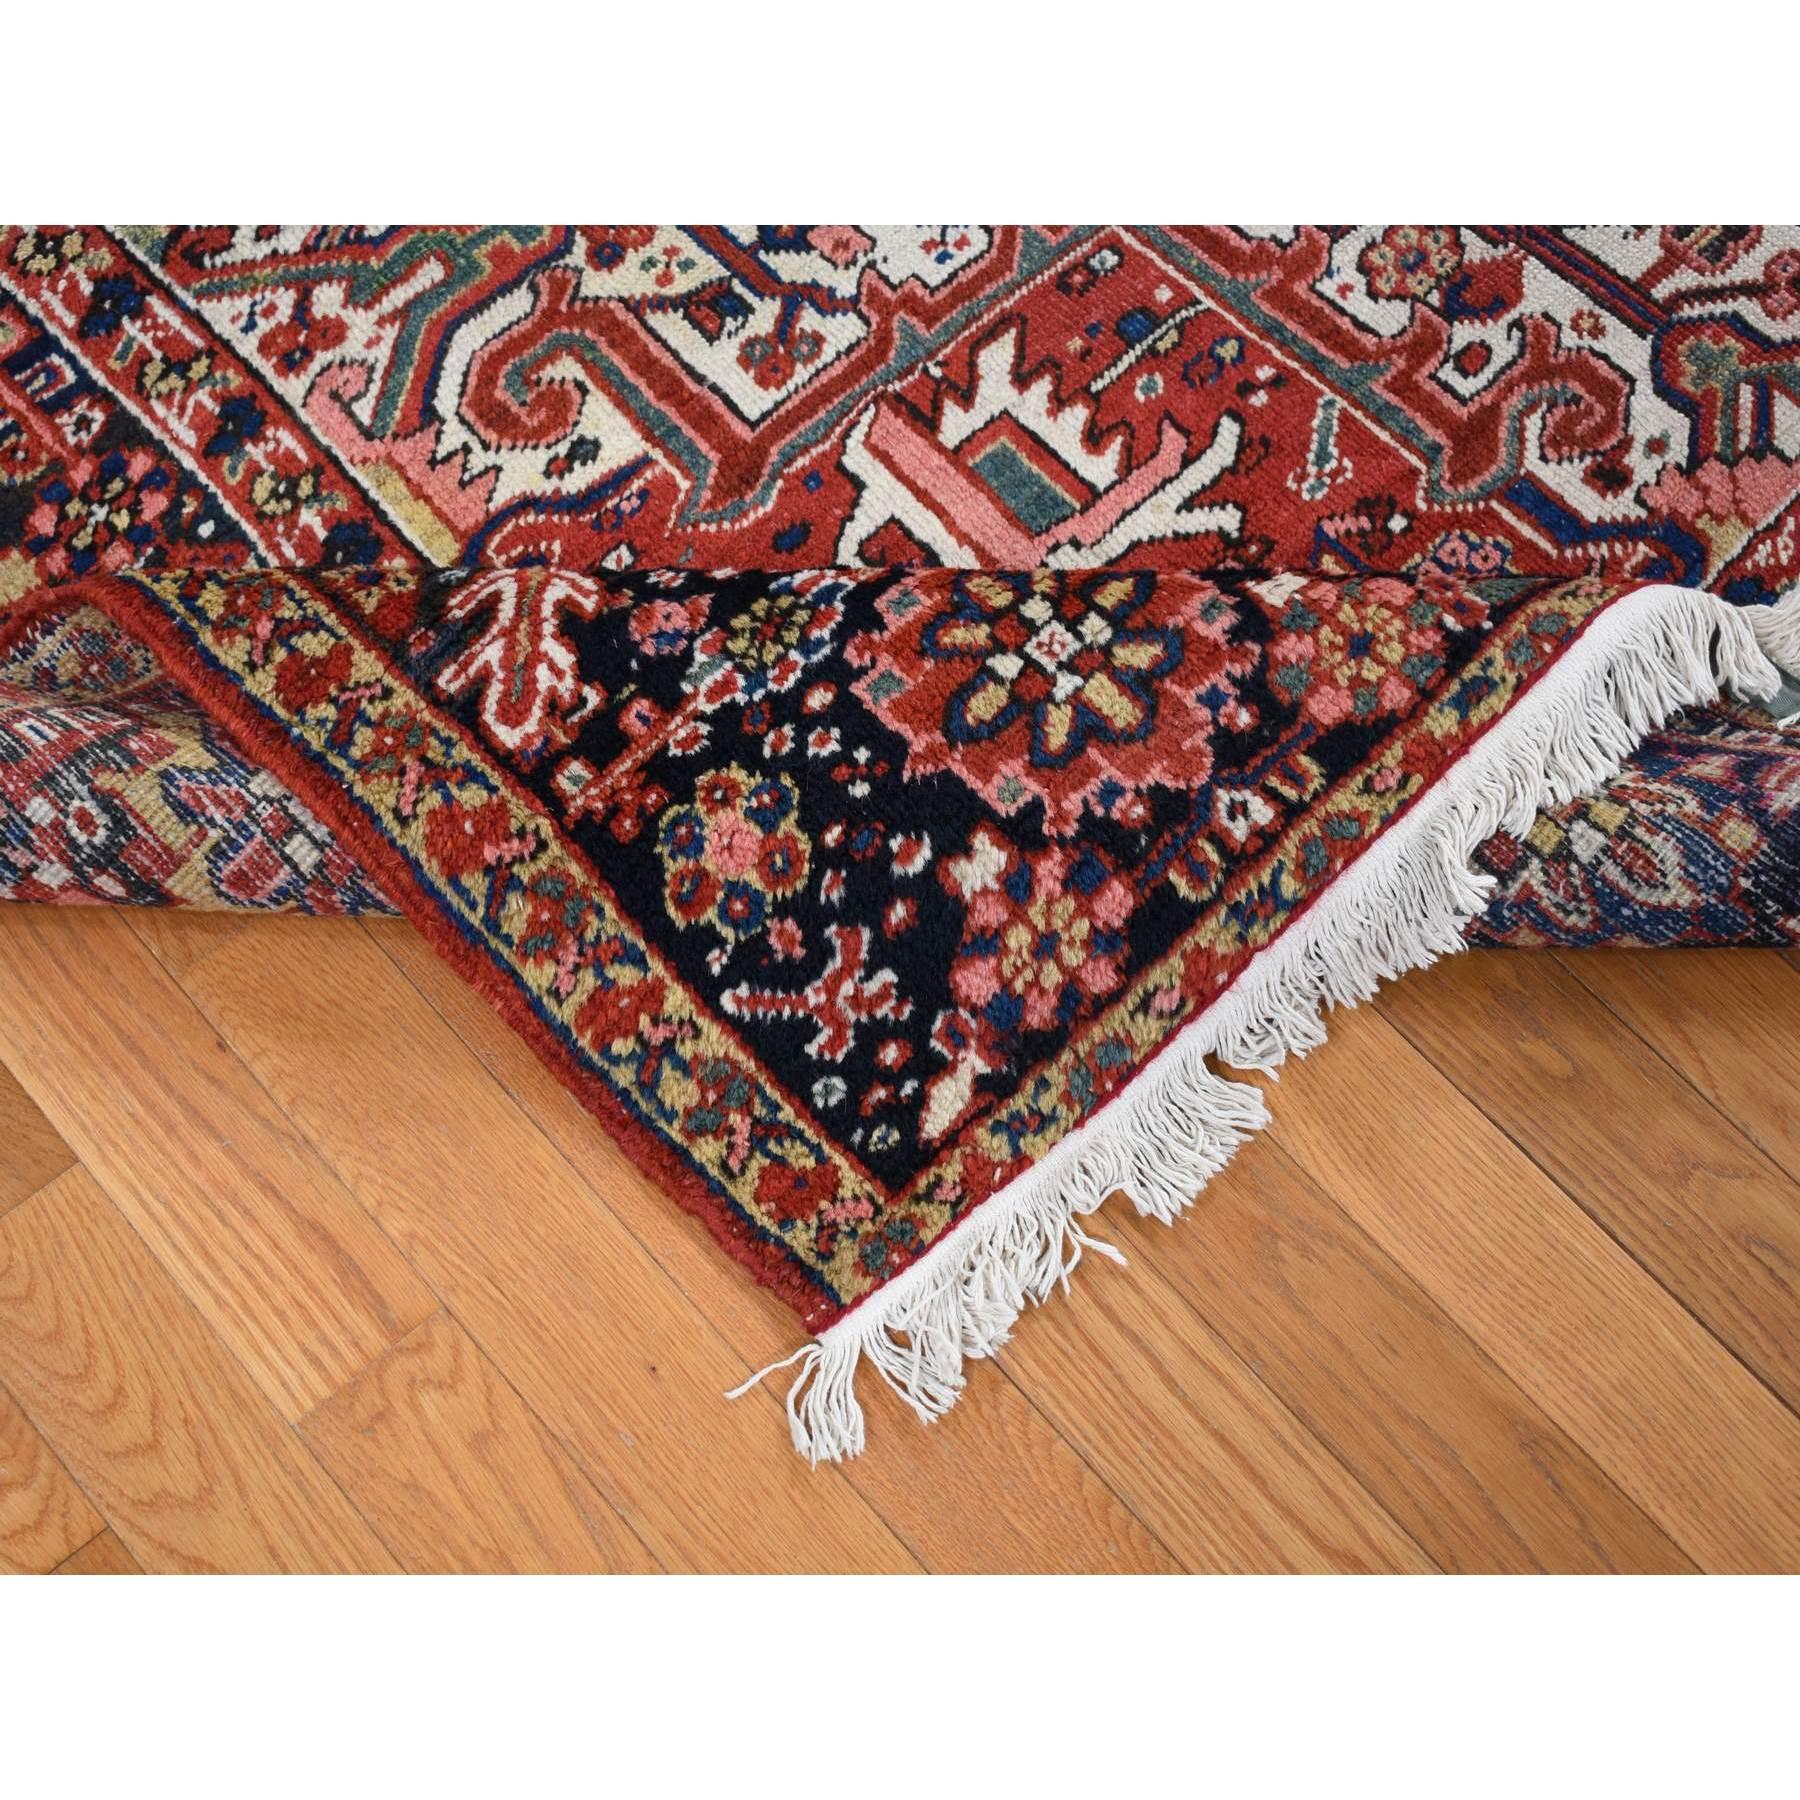 Early 20th Century Chili Red Antique Persian Heriz Soft and Full Pile Pure Wool Hand Knotted Rug For Sale